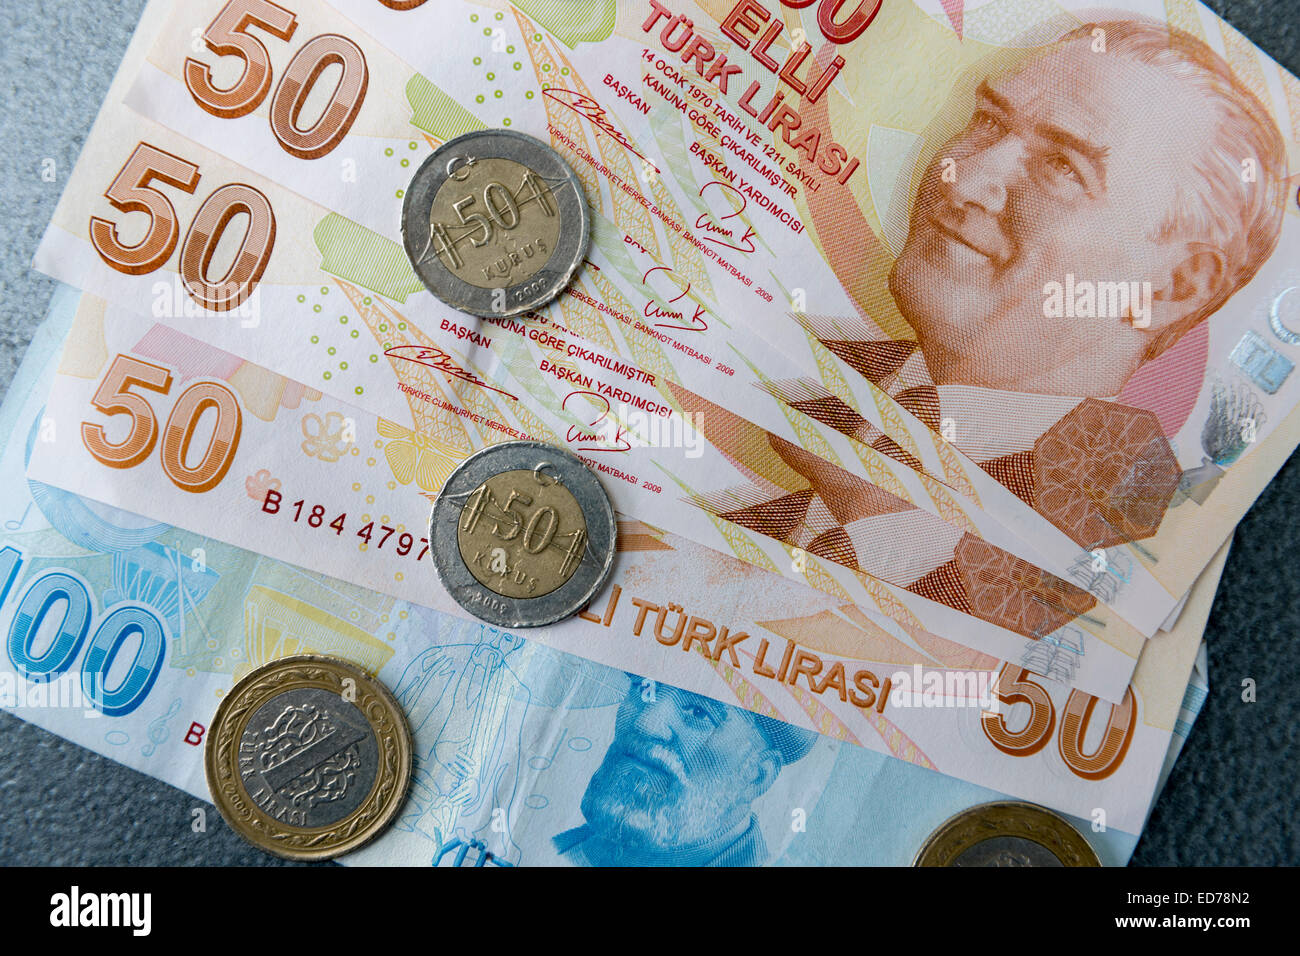 Turkish lira - Turk Lirasi - local currency coins and banknotes, featuring image of Ataturk, in Republic of Turkey Stock Photo